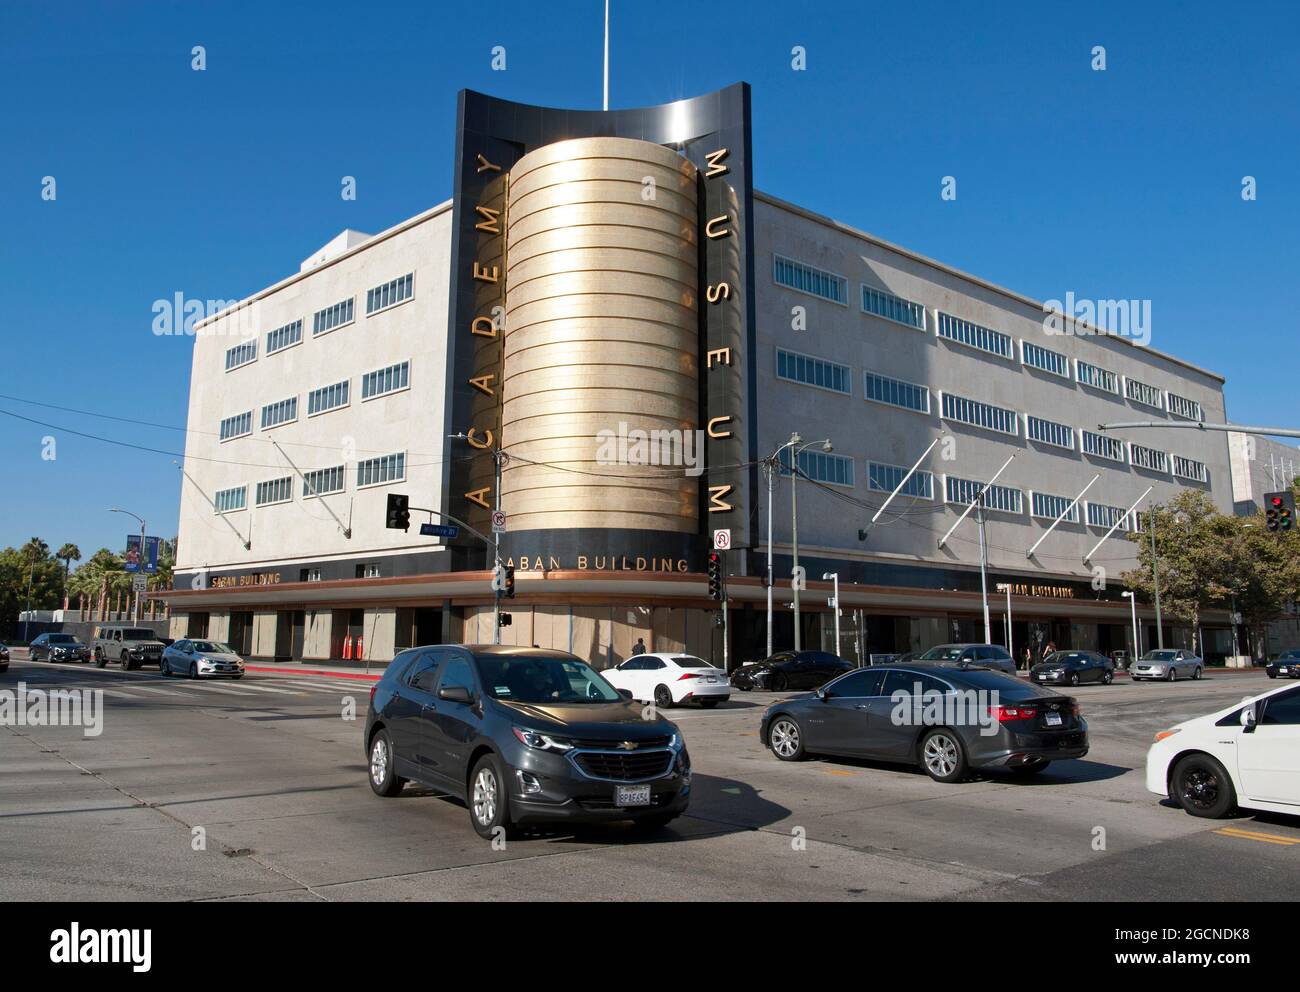 The Academy Museum of Motion Pictures, Saban Building on Wilshirel Blvd. in Los Angeles, CA. Stock Photo